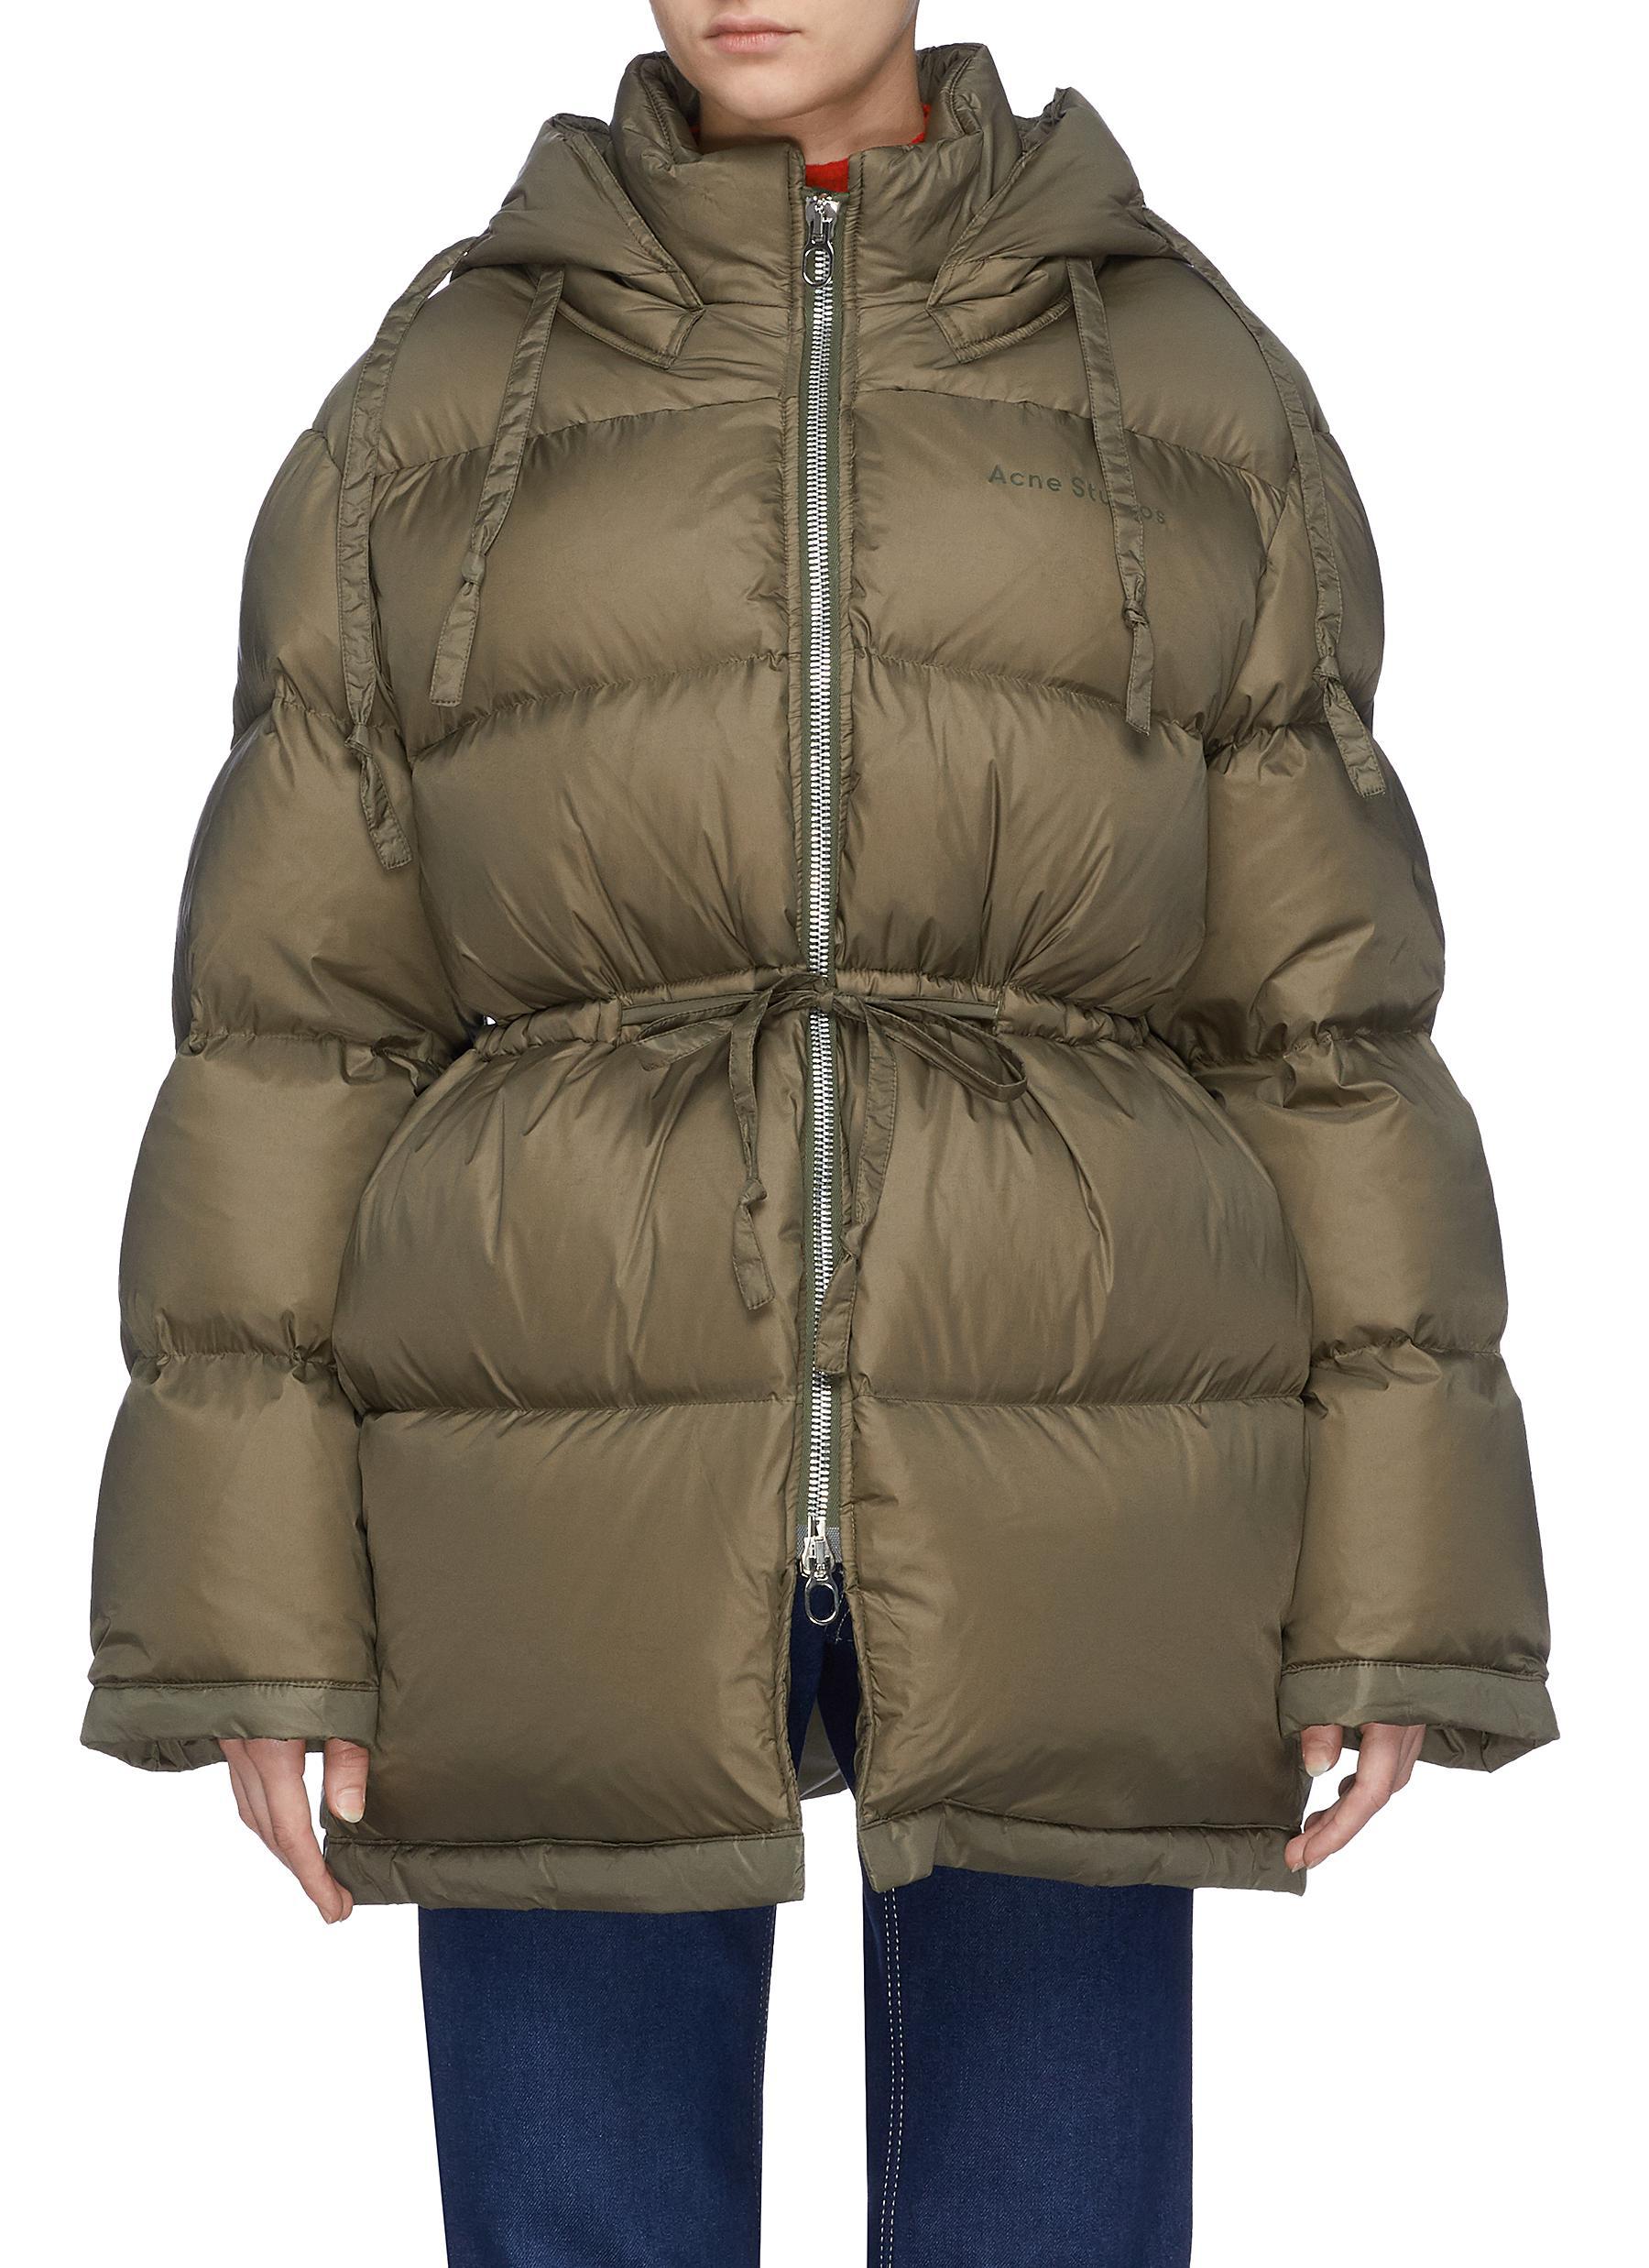 Acne Studios Drawstring Oversized Hooded Down Puffer Jacket in